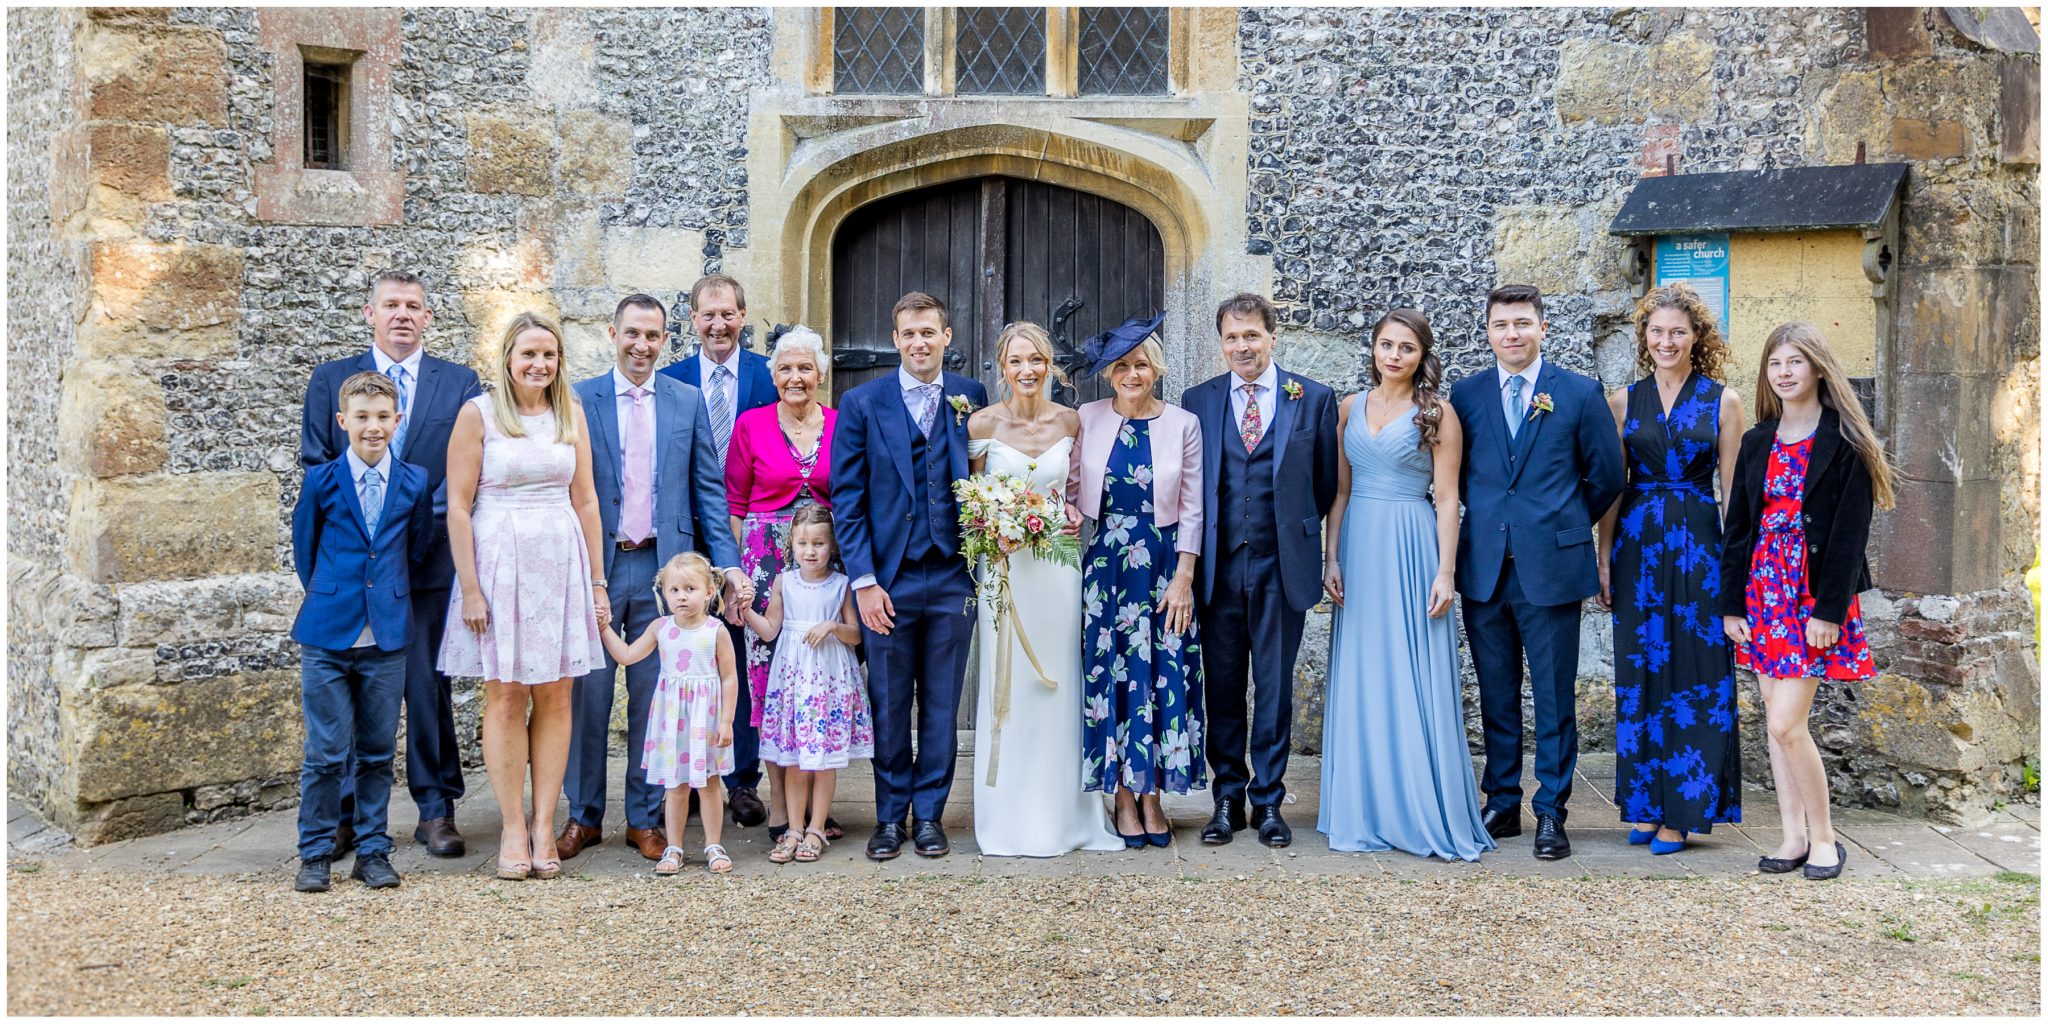 Family group photographs in front of the church door